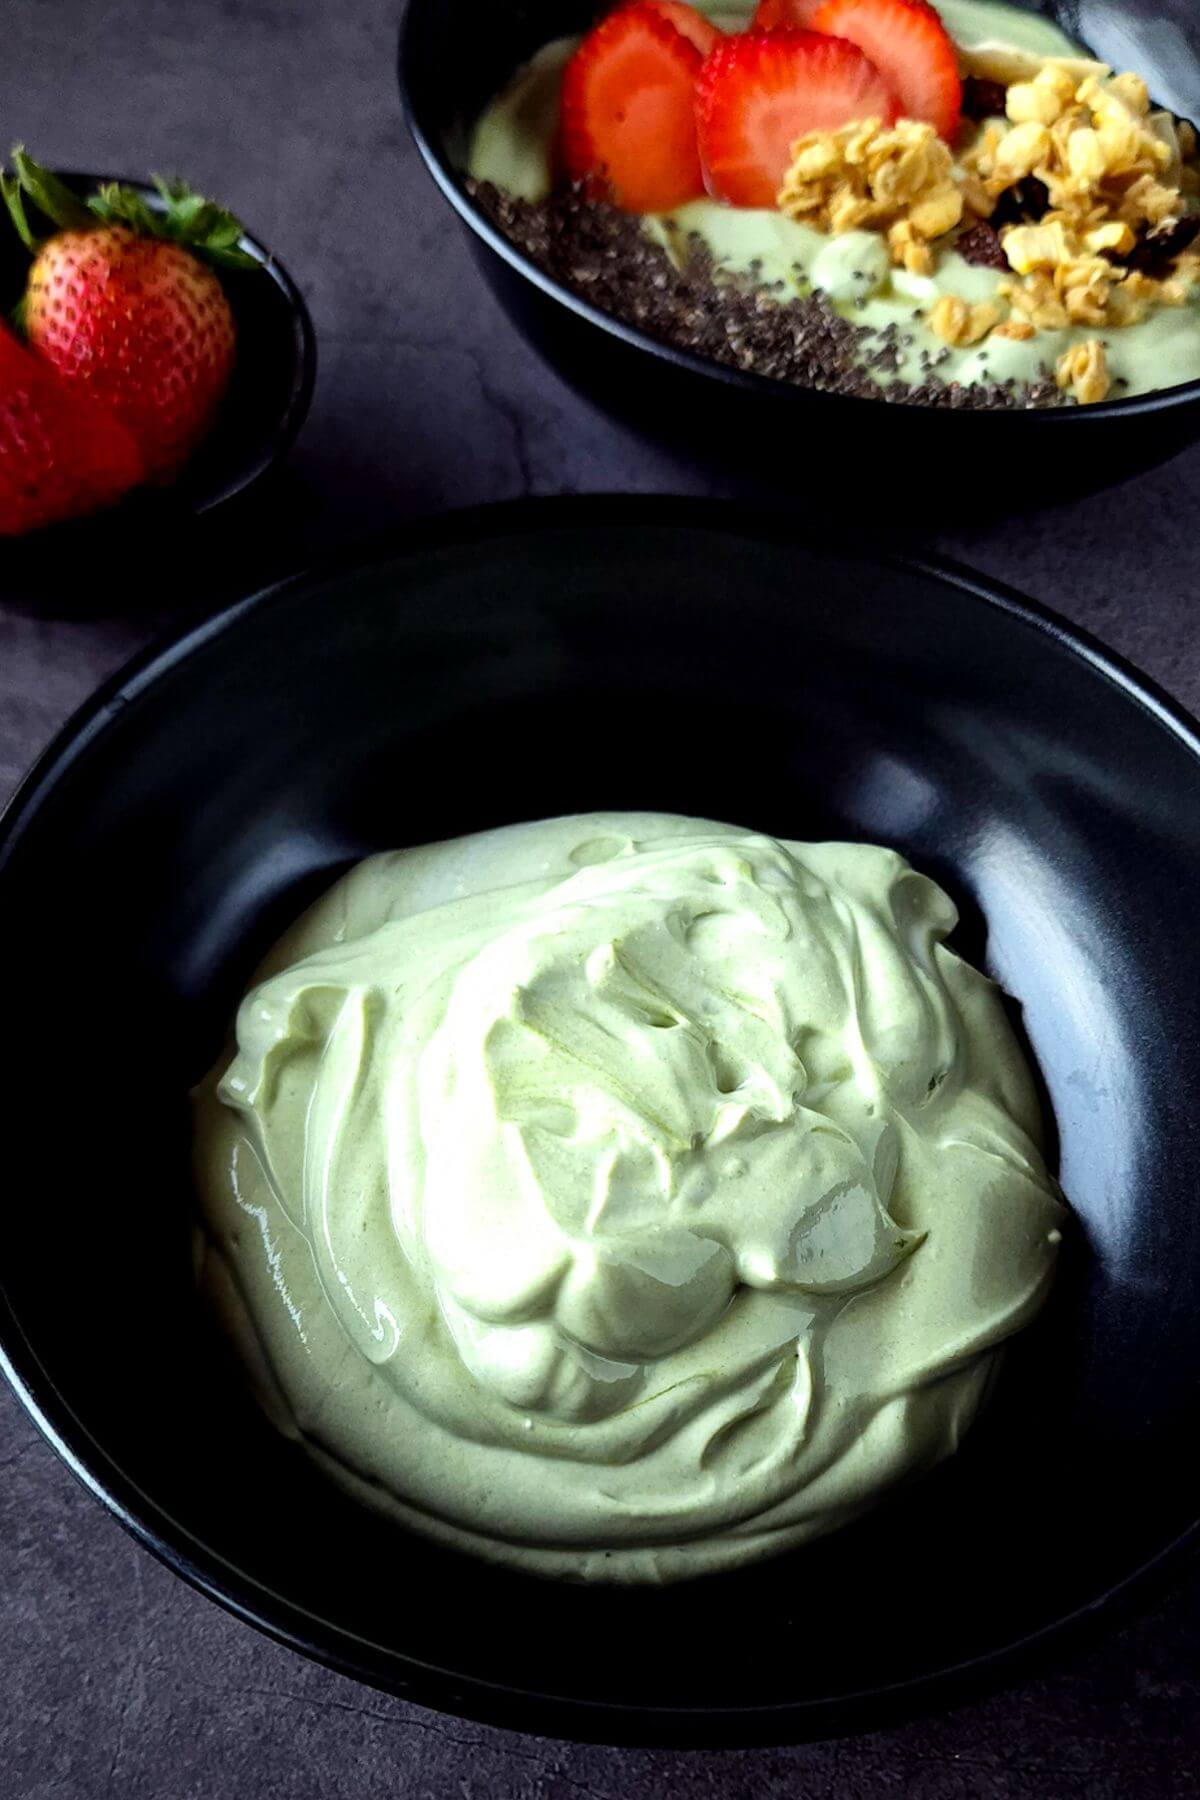 Matcha yogurt in a black bowl with a yogurt bowl and a bowl of strawberries in the bcakground.